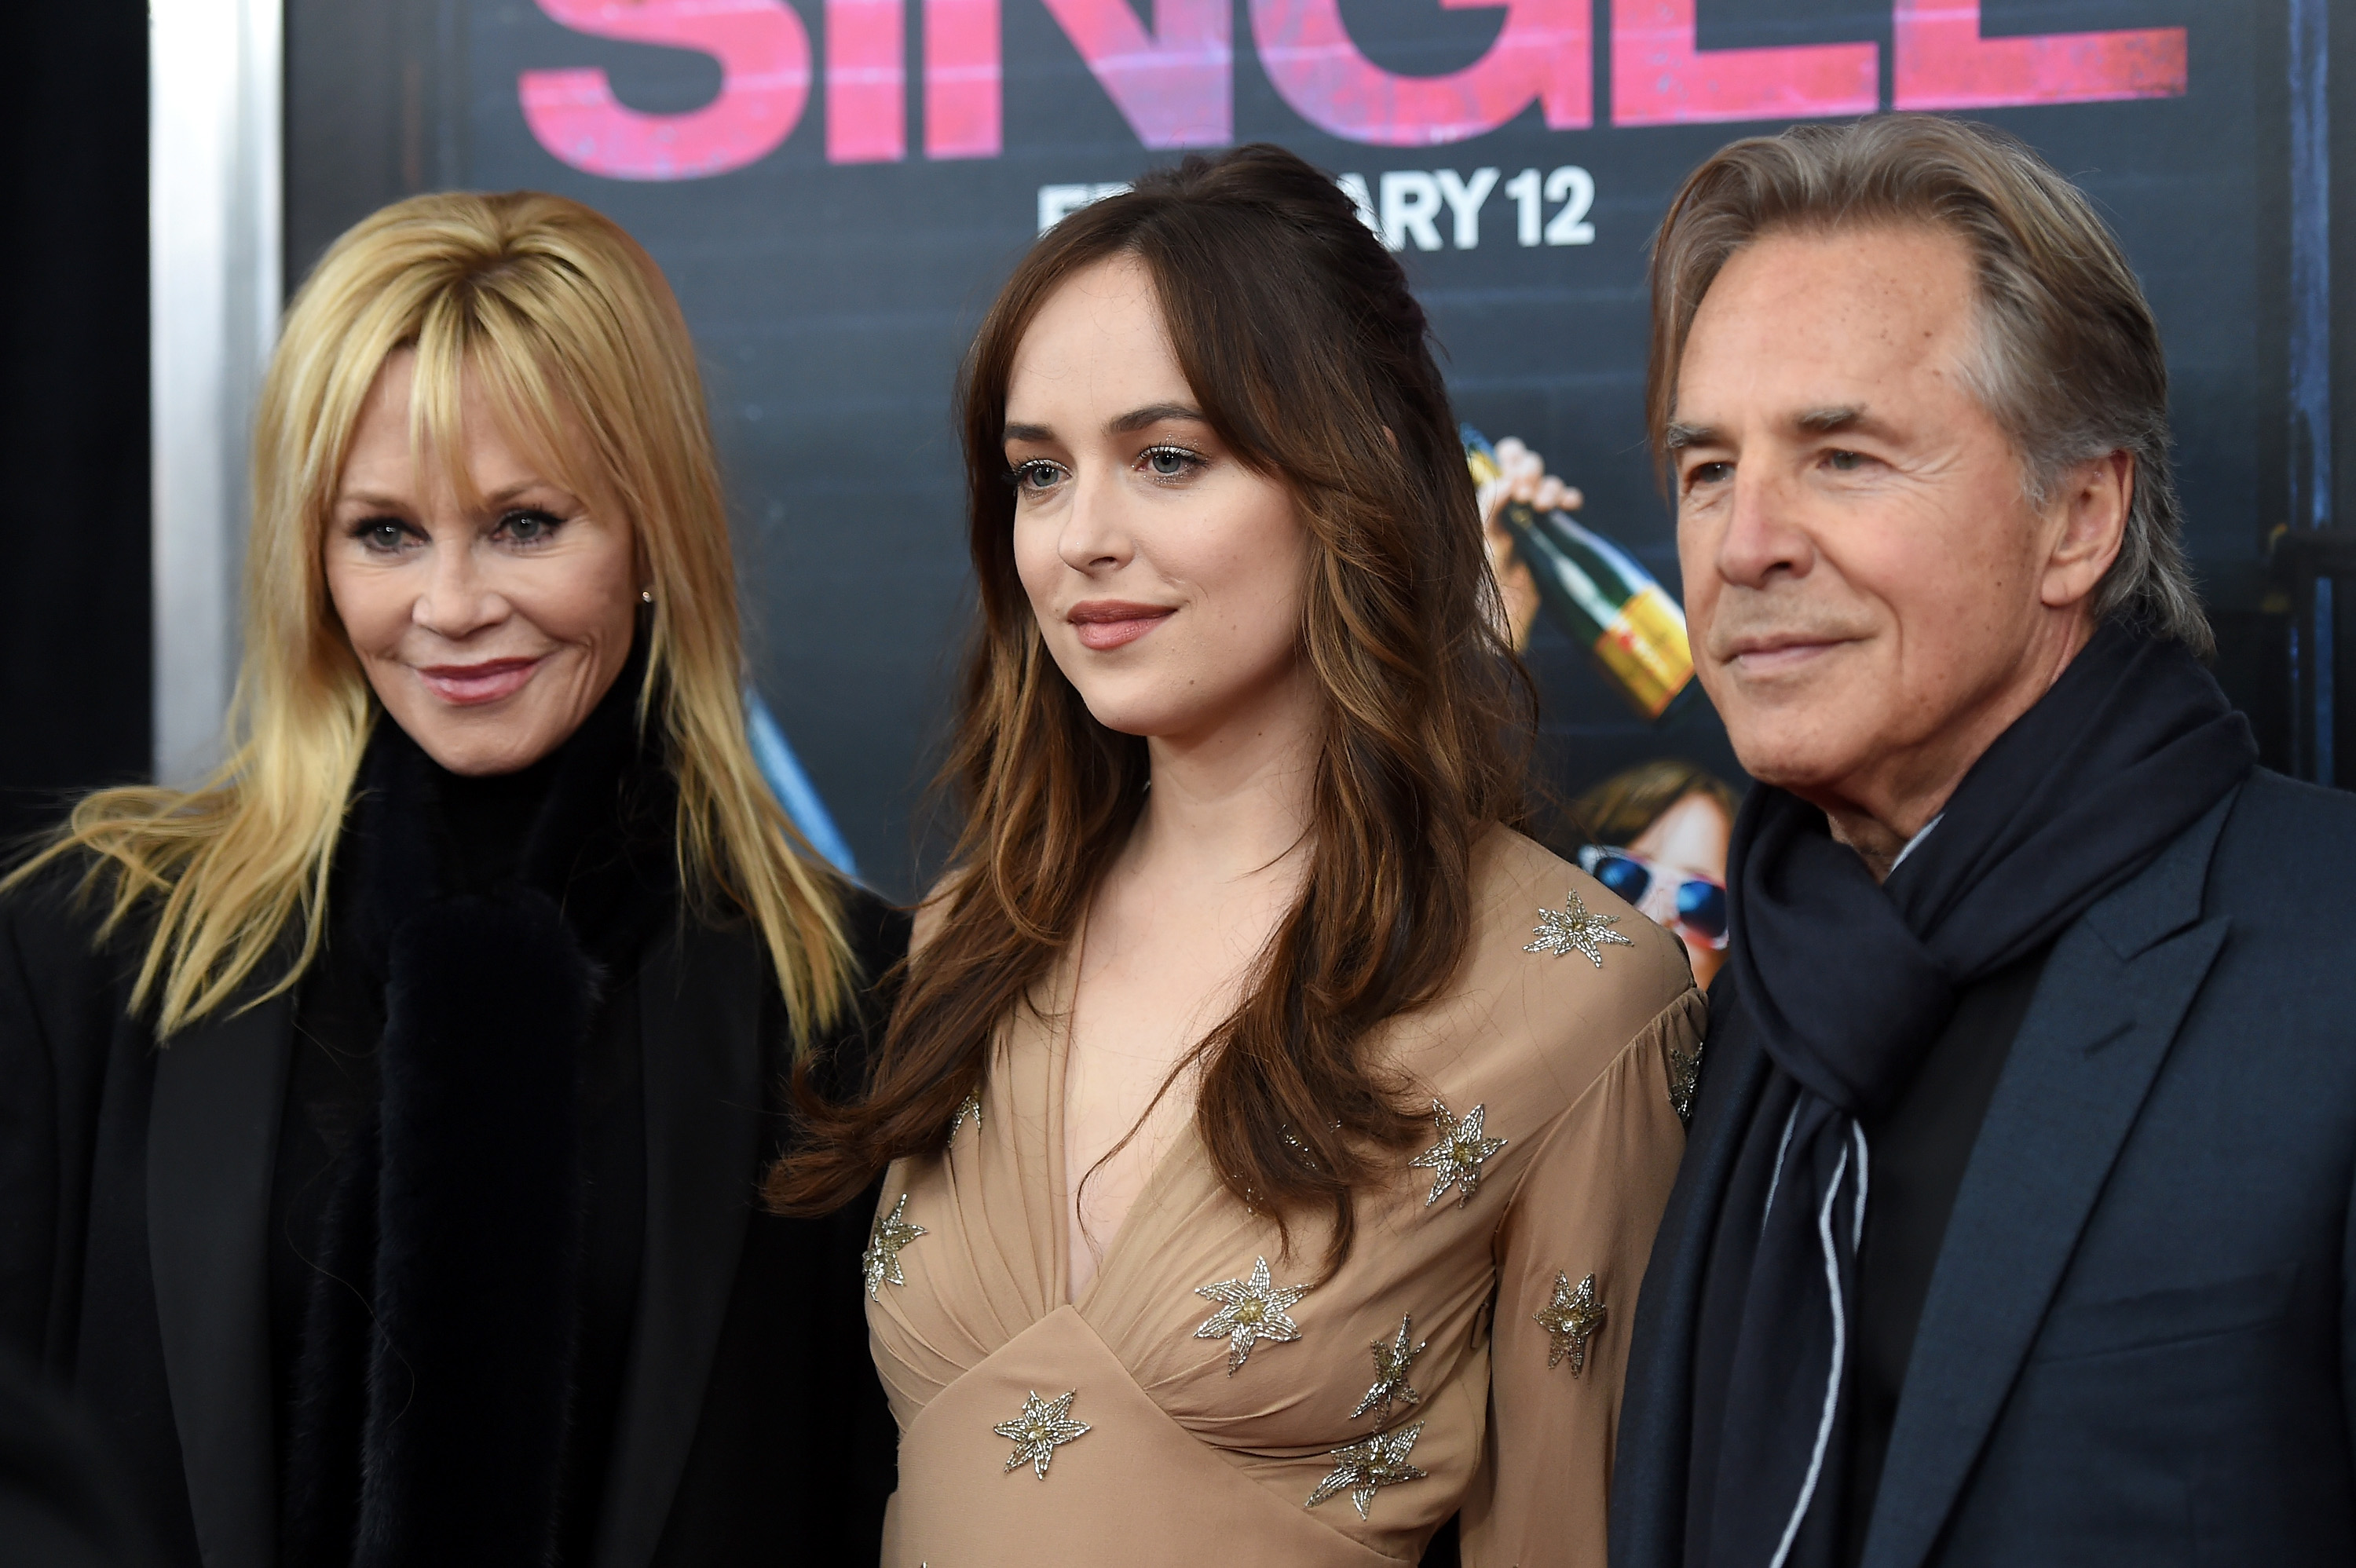 Melanie Griffith, Dakota Johnson, and Don Johnson at the New York premiere of "How To Be Single" on February 3, 2016. | Source: Getty Images